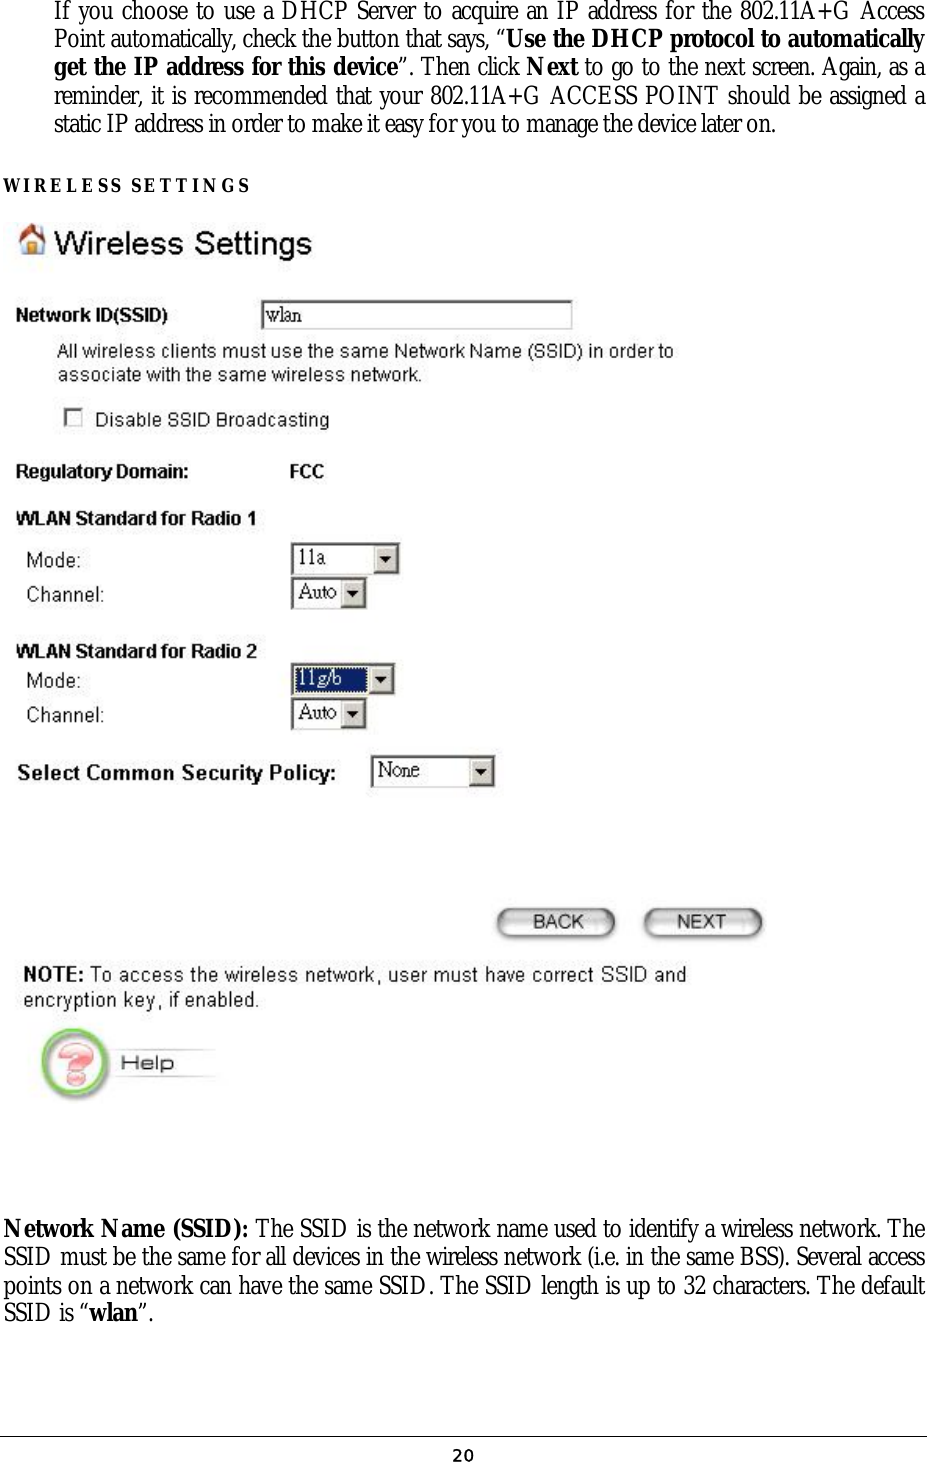 If you choose to use a DHCP Server to acquire an IP address for the 802.11A+G Access Point automatically, check the button that says, “Use the DHCP protocol to automatically get the IP address for this device”. Then click Next to go to the next screen. Again, as a reminder, it is recommended that your 802.11A+G ACCESS POINT should be assigned a static IP address in order to make it easy for you to manage the device later on. WIRELESS SETTINGS        Network Name (SSID): The SSID is the network name used to identify a wireless network. The SSID must be the same for all devices in the wireless network (i.e. in the same BSS). Several access points on a network can have the same SSID. The SSID length is up to 32 characters. The default SSID is “wlan”.  20